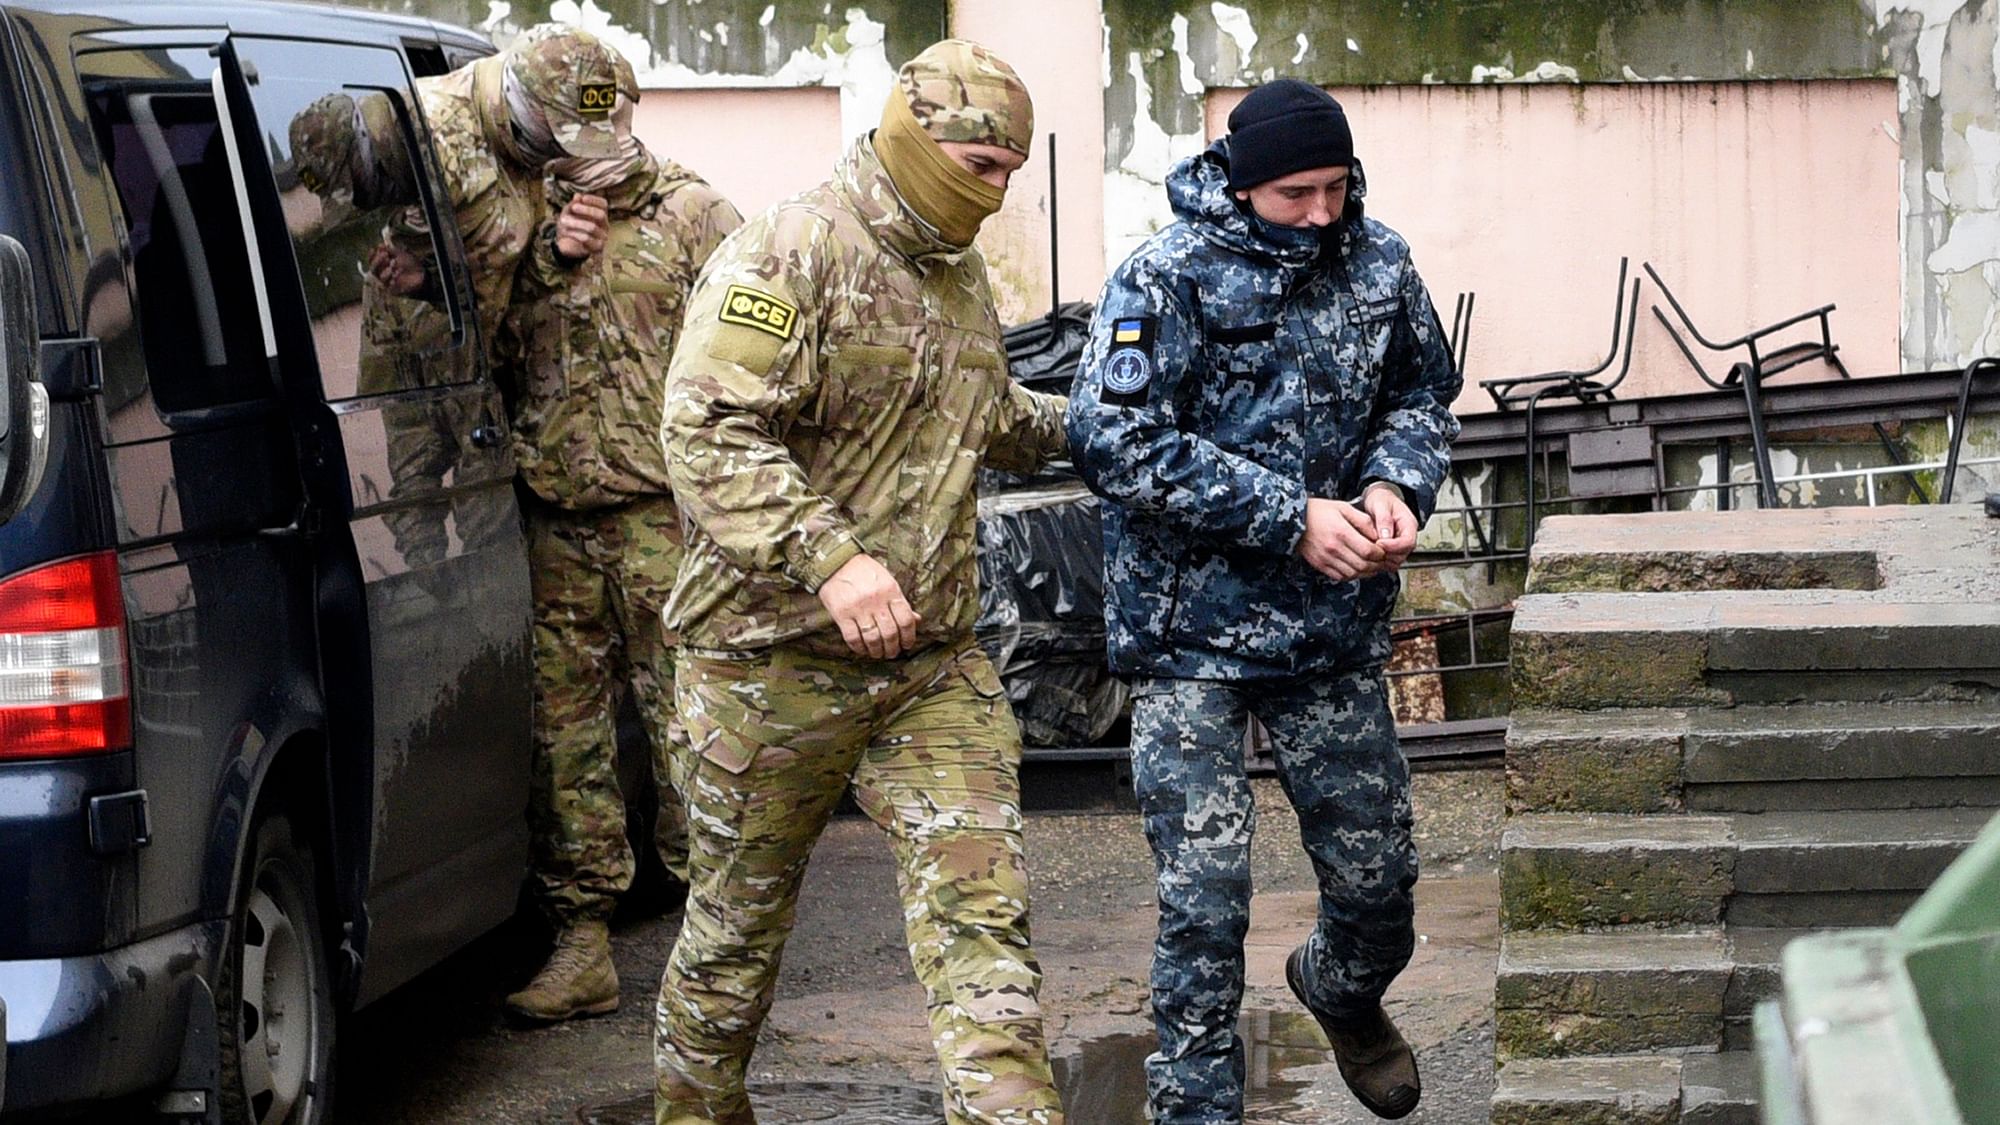 File image of a Russian intelligence agency (FSB) officer. Image used for representational purposes.